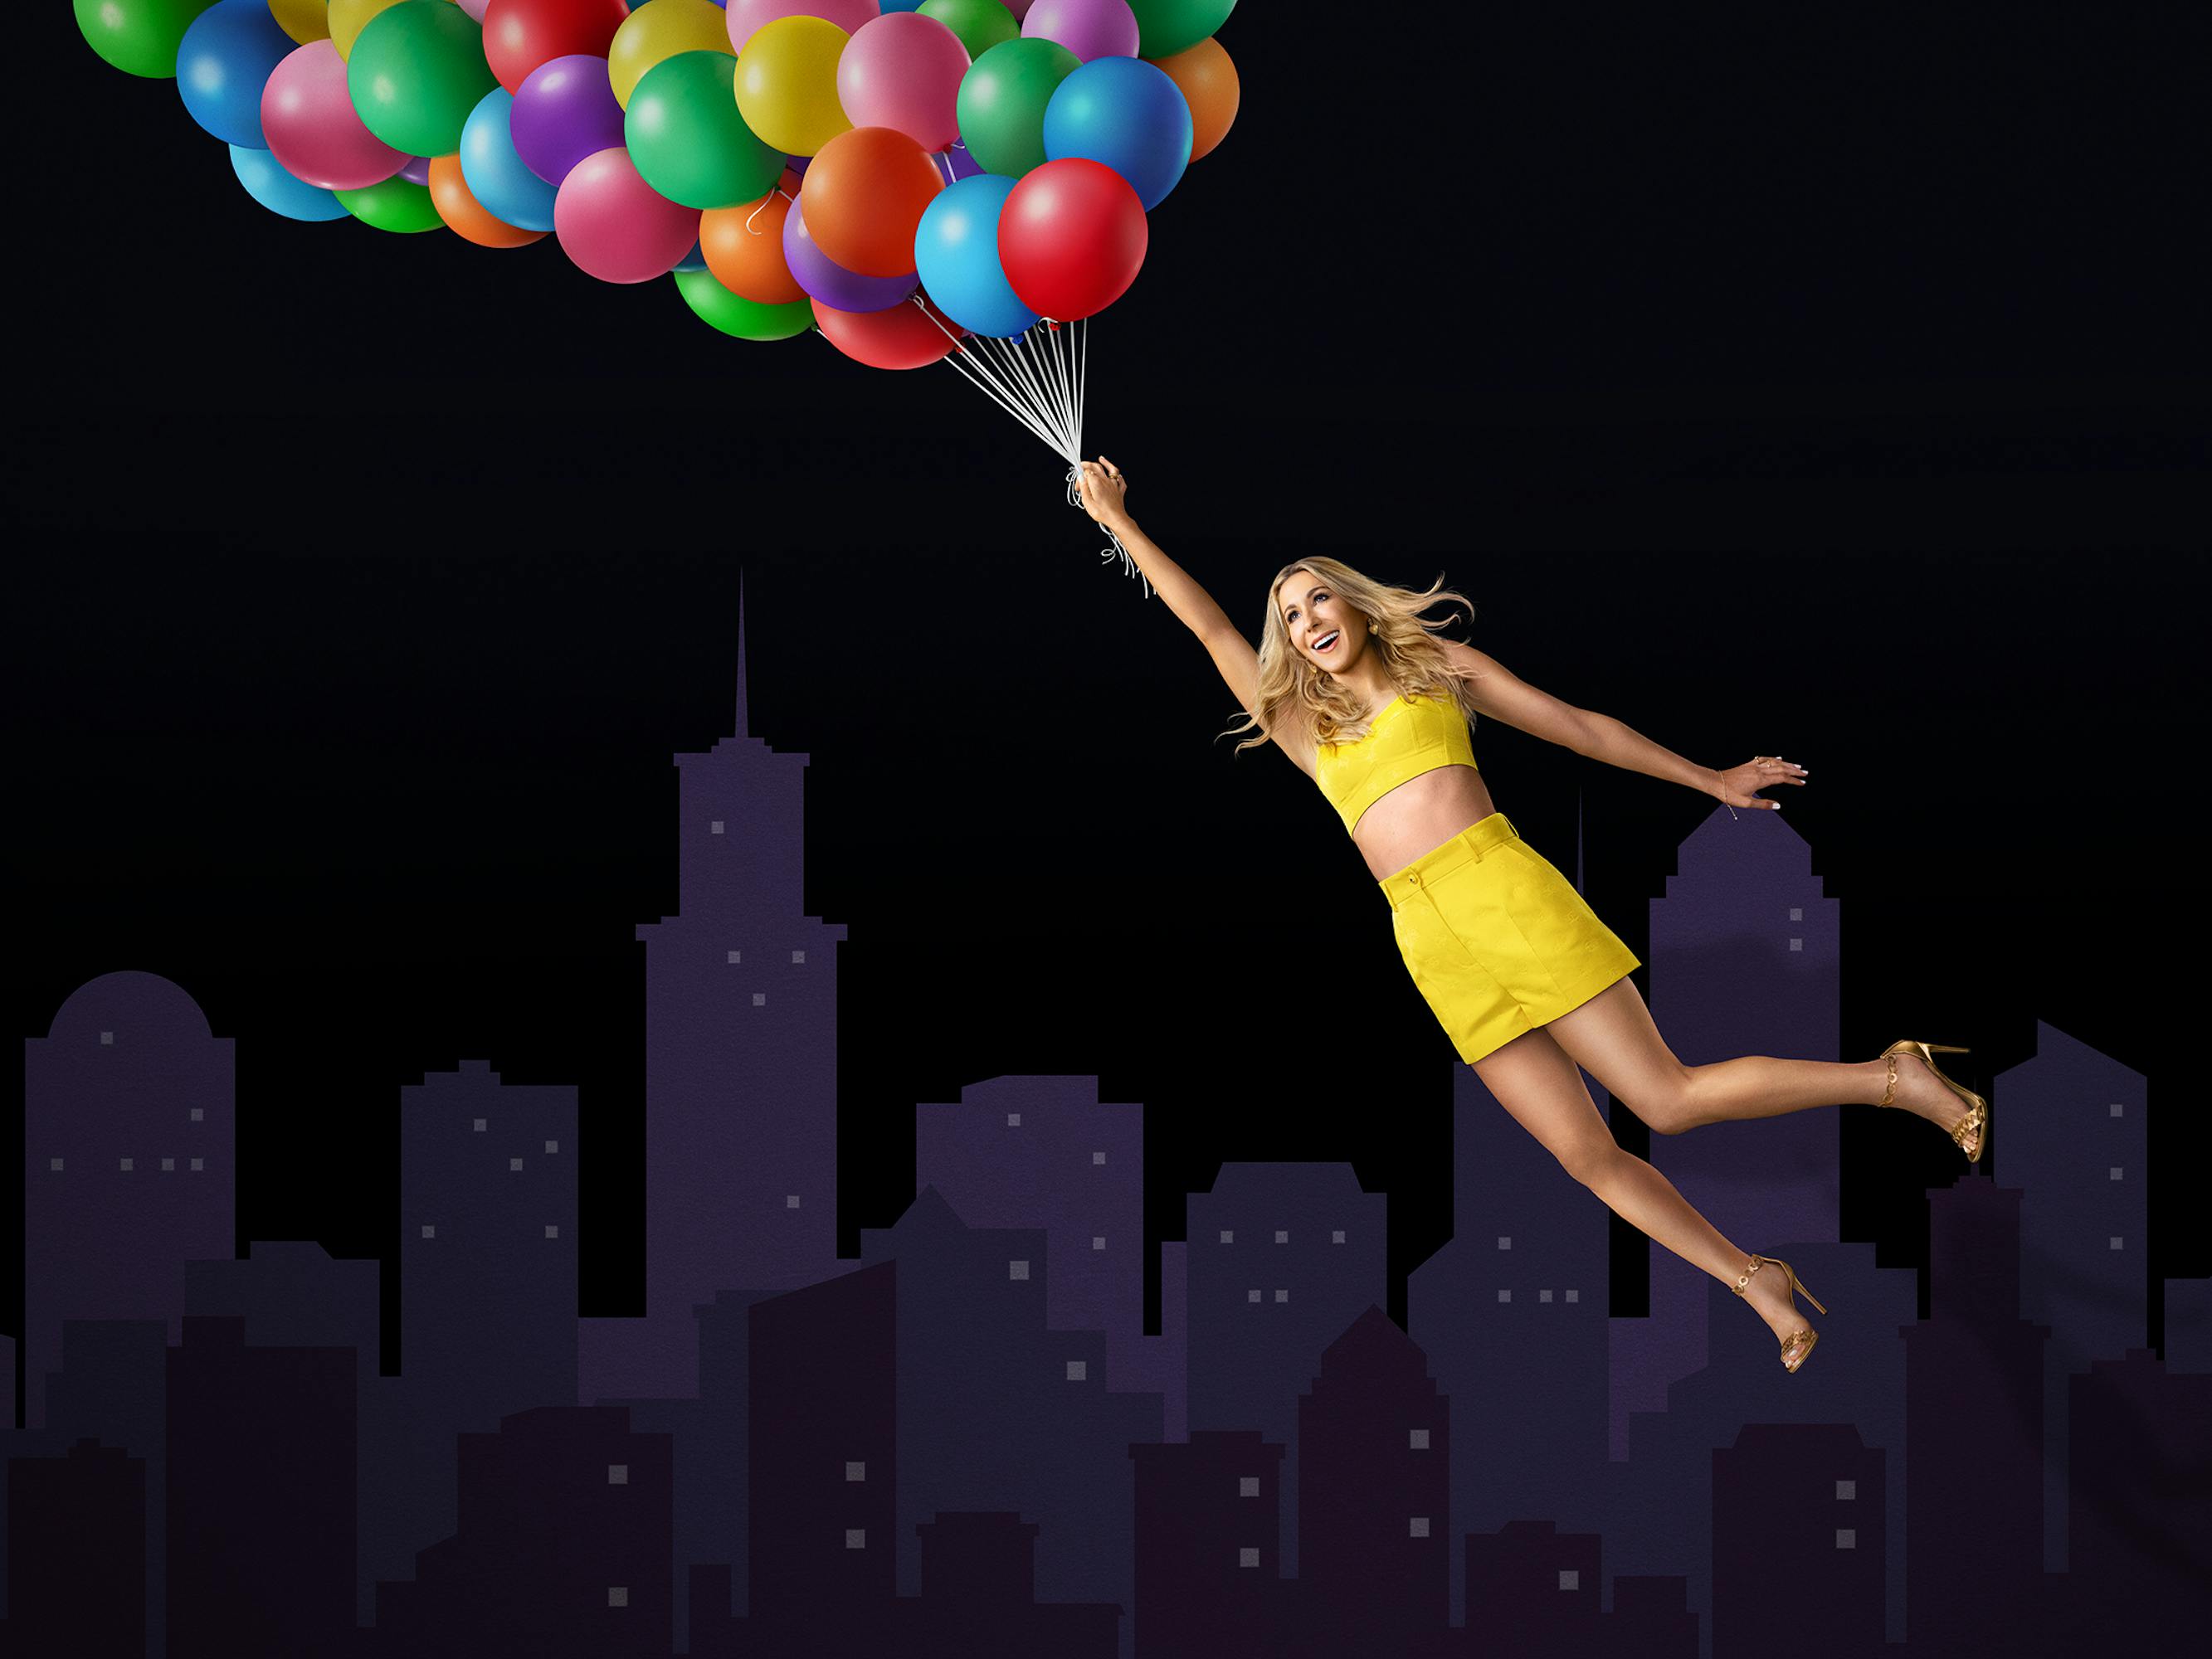 Nikki Glaser wears a yellow set and holds a bushel of balloons.